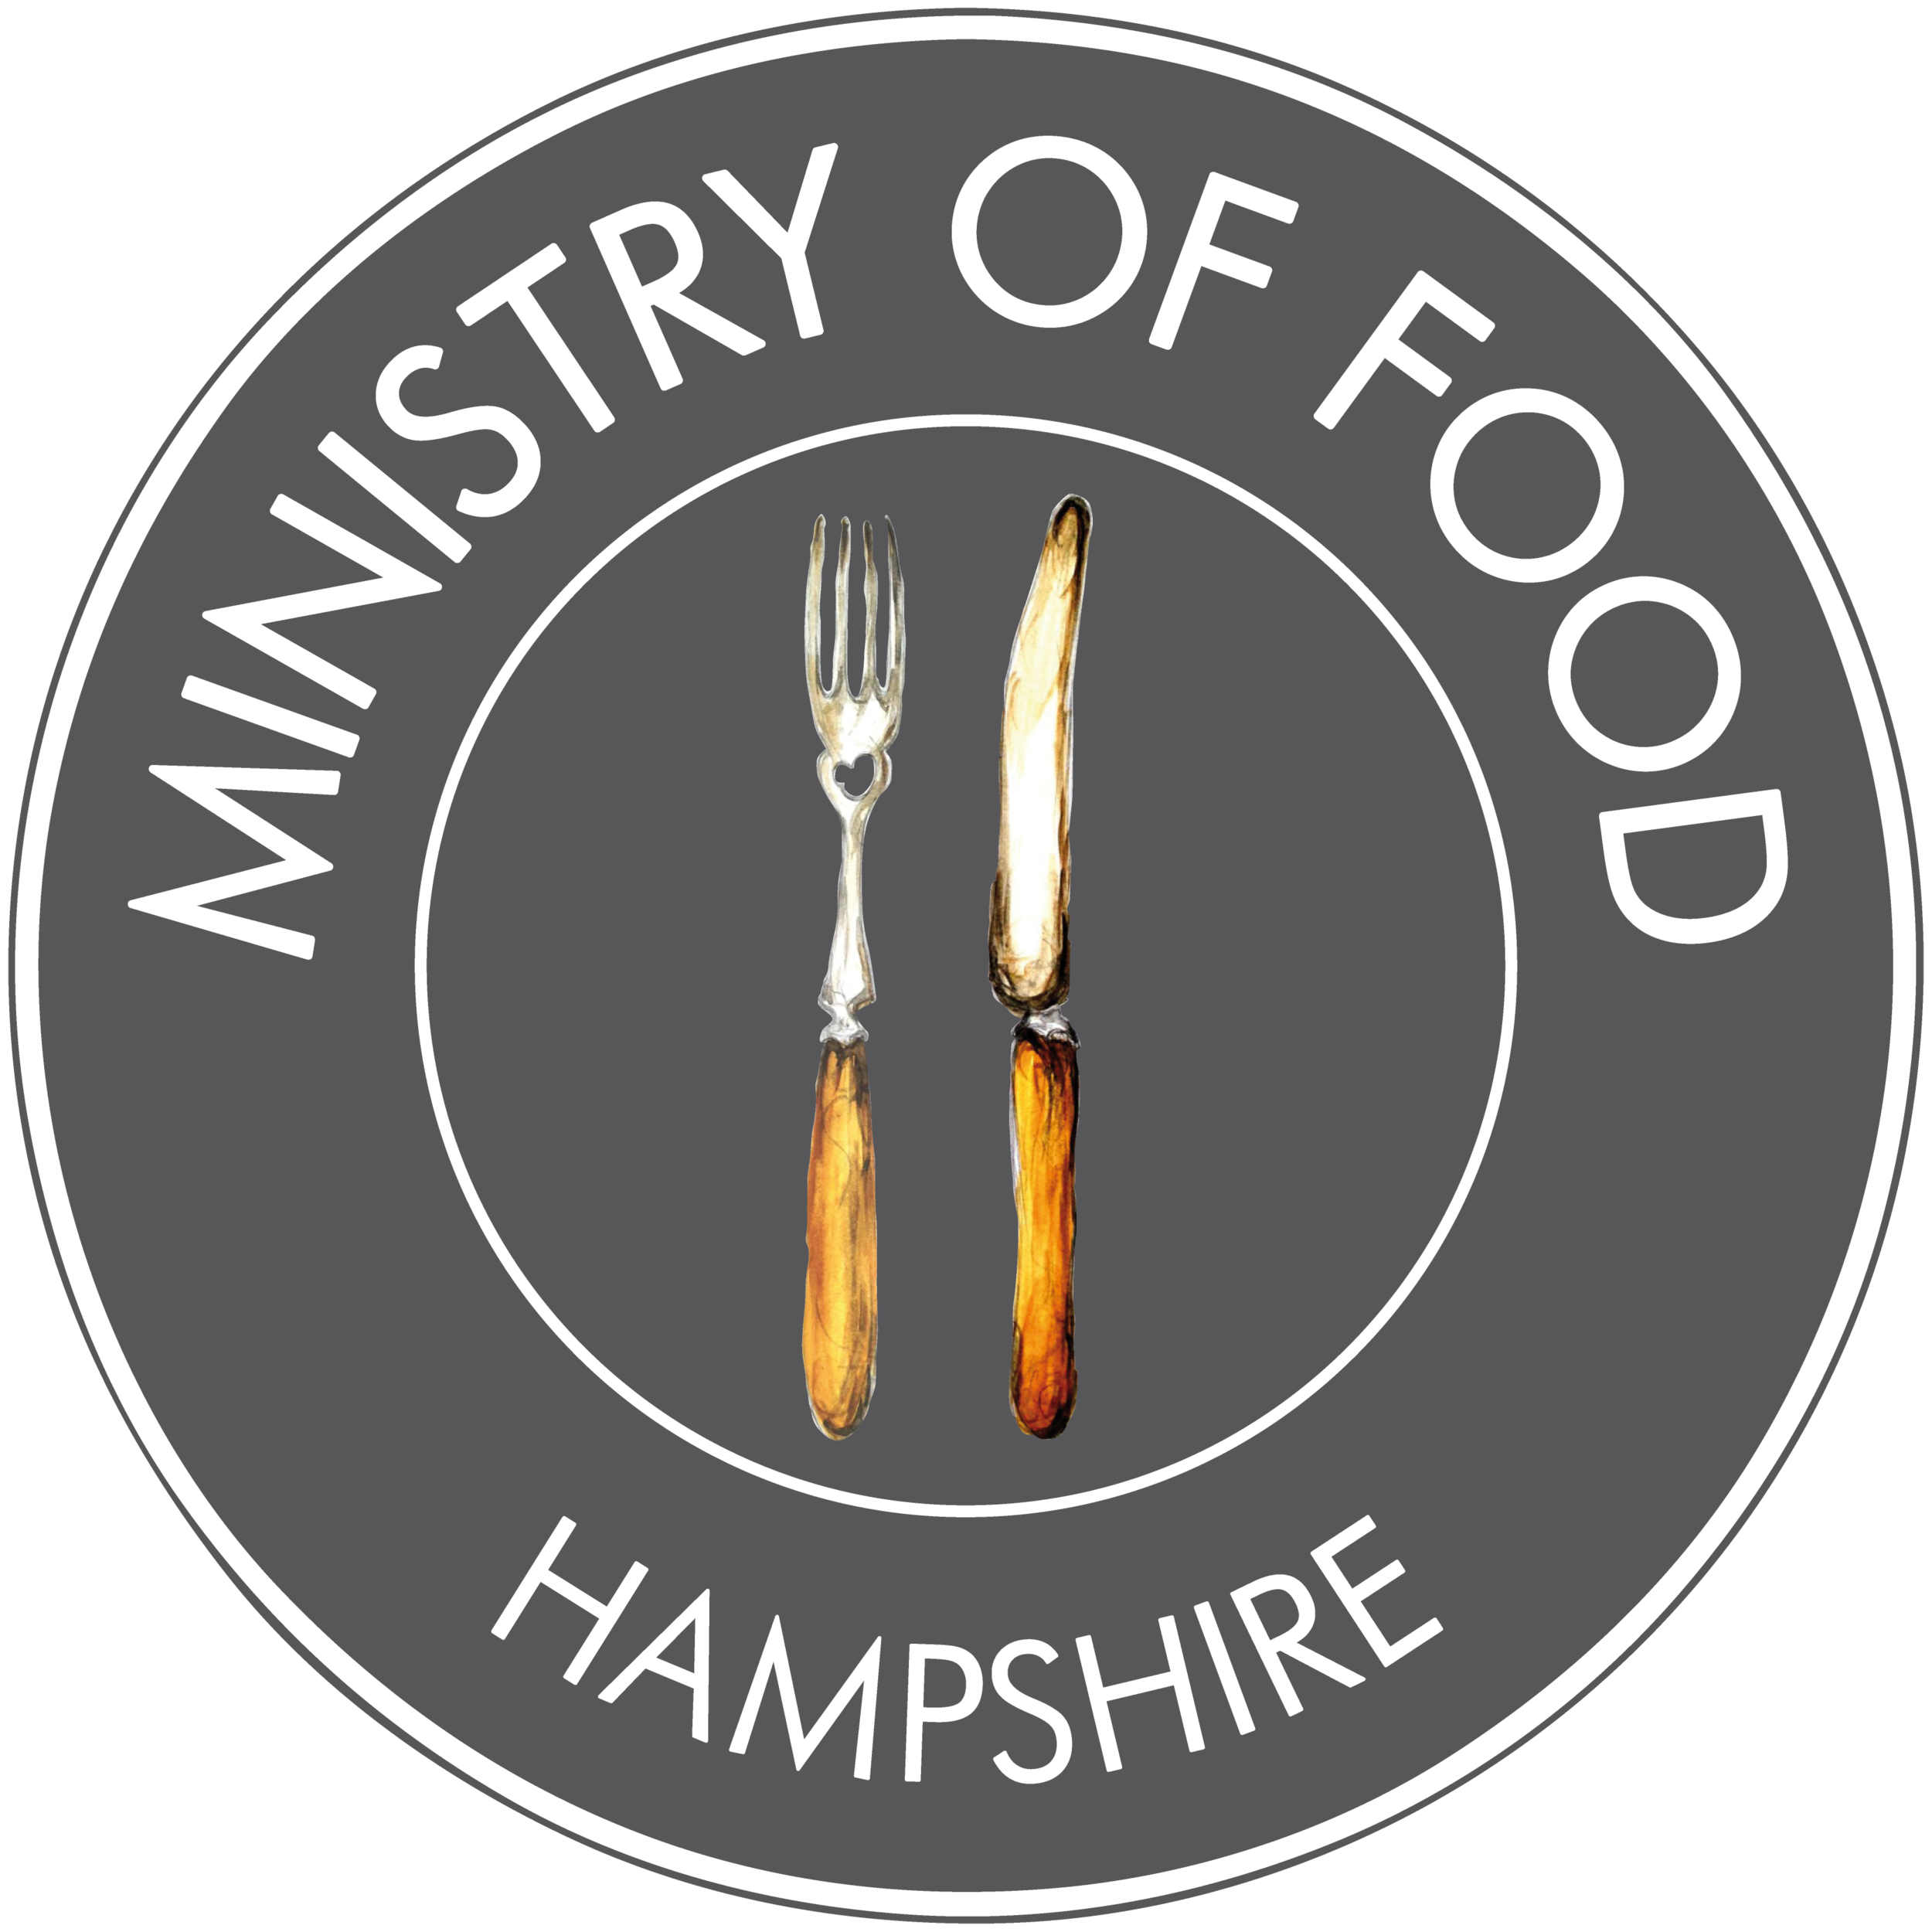 Ministry of Food Hampshire